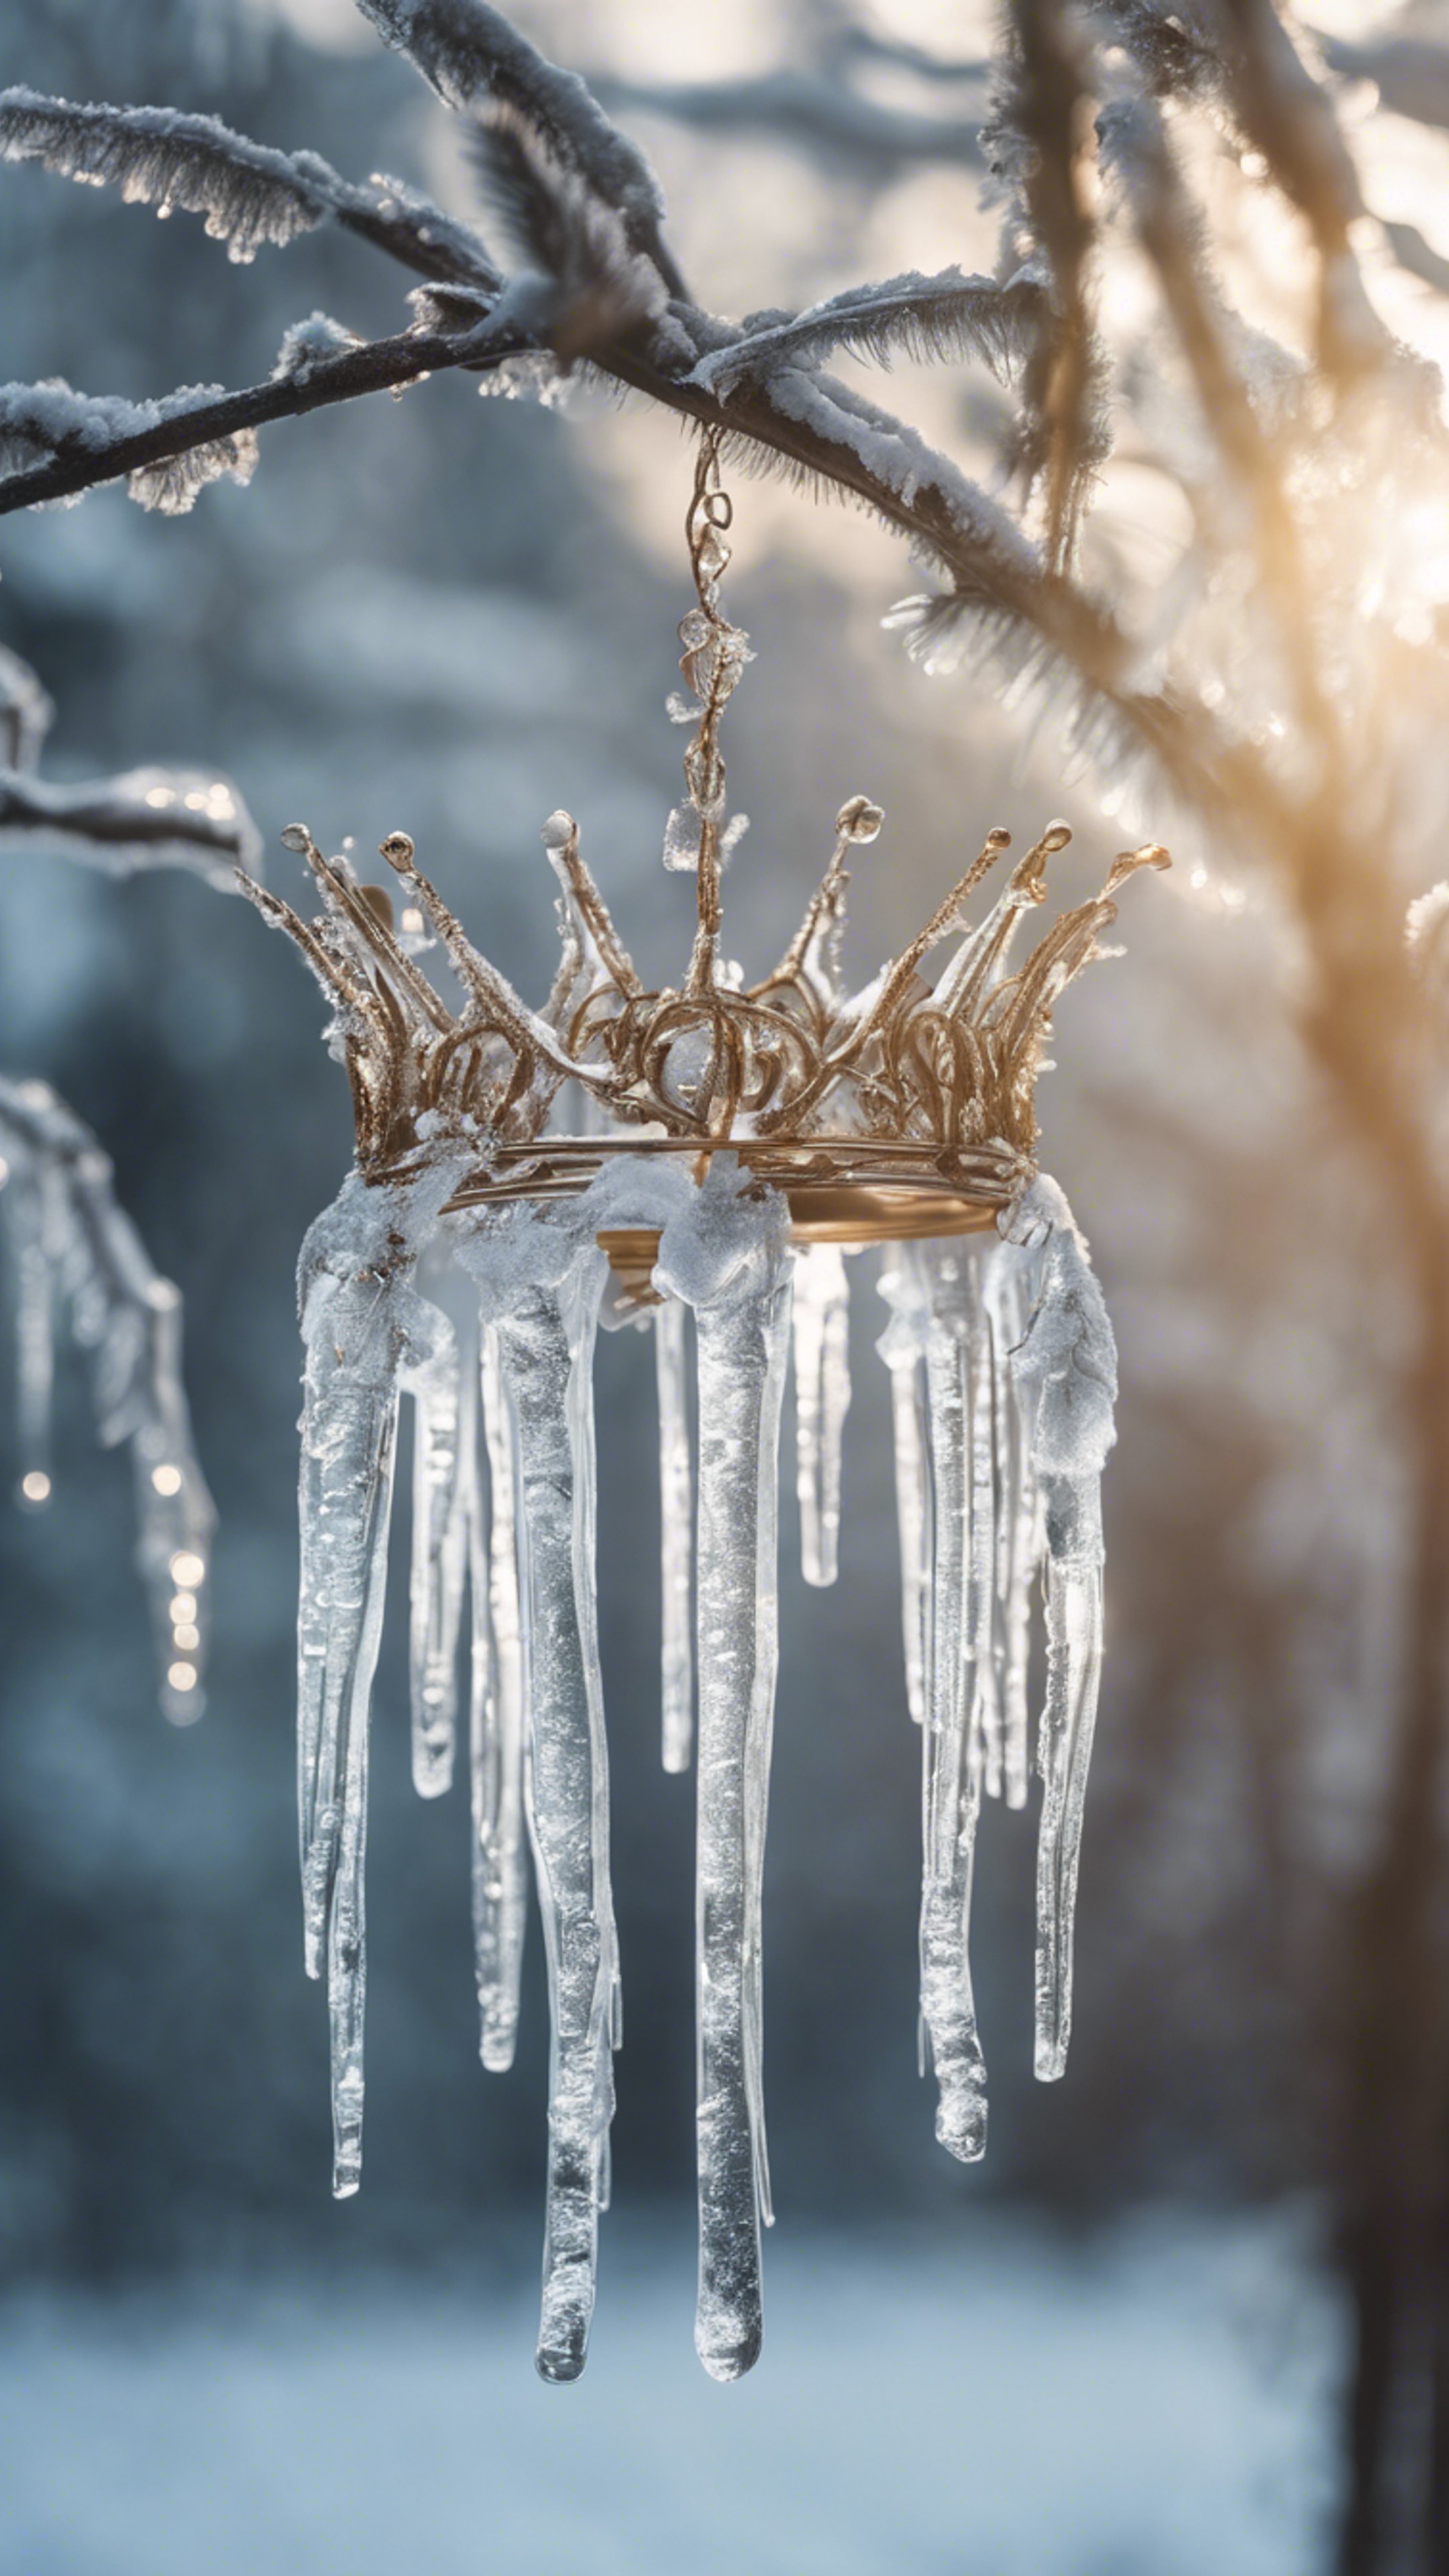 A magical crown made from icicles hanging from a frosty branch on a crisp winter morning. 壁紙[45a415f8db0d4322b005]